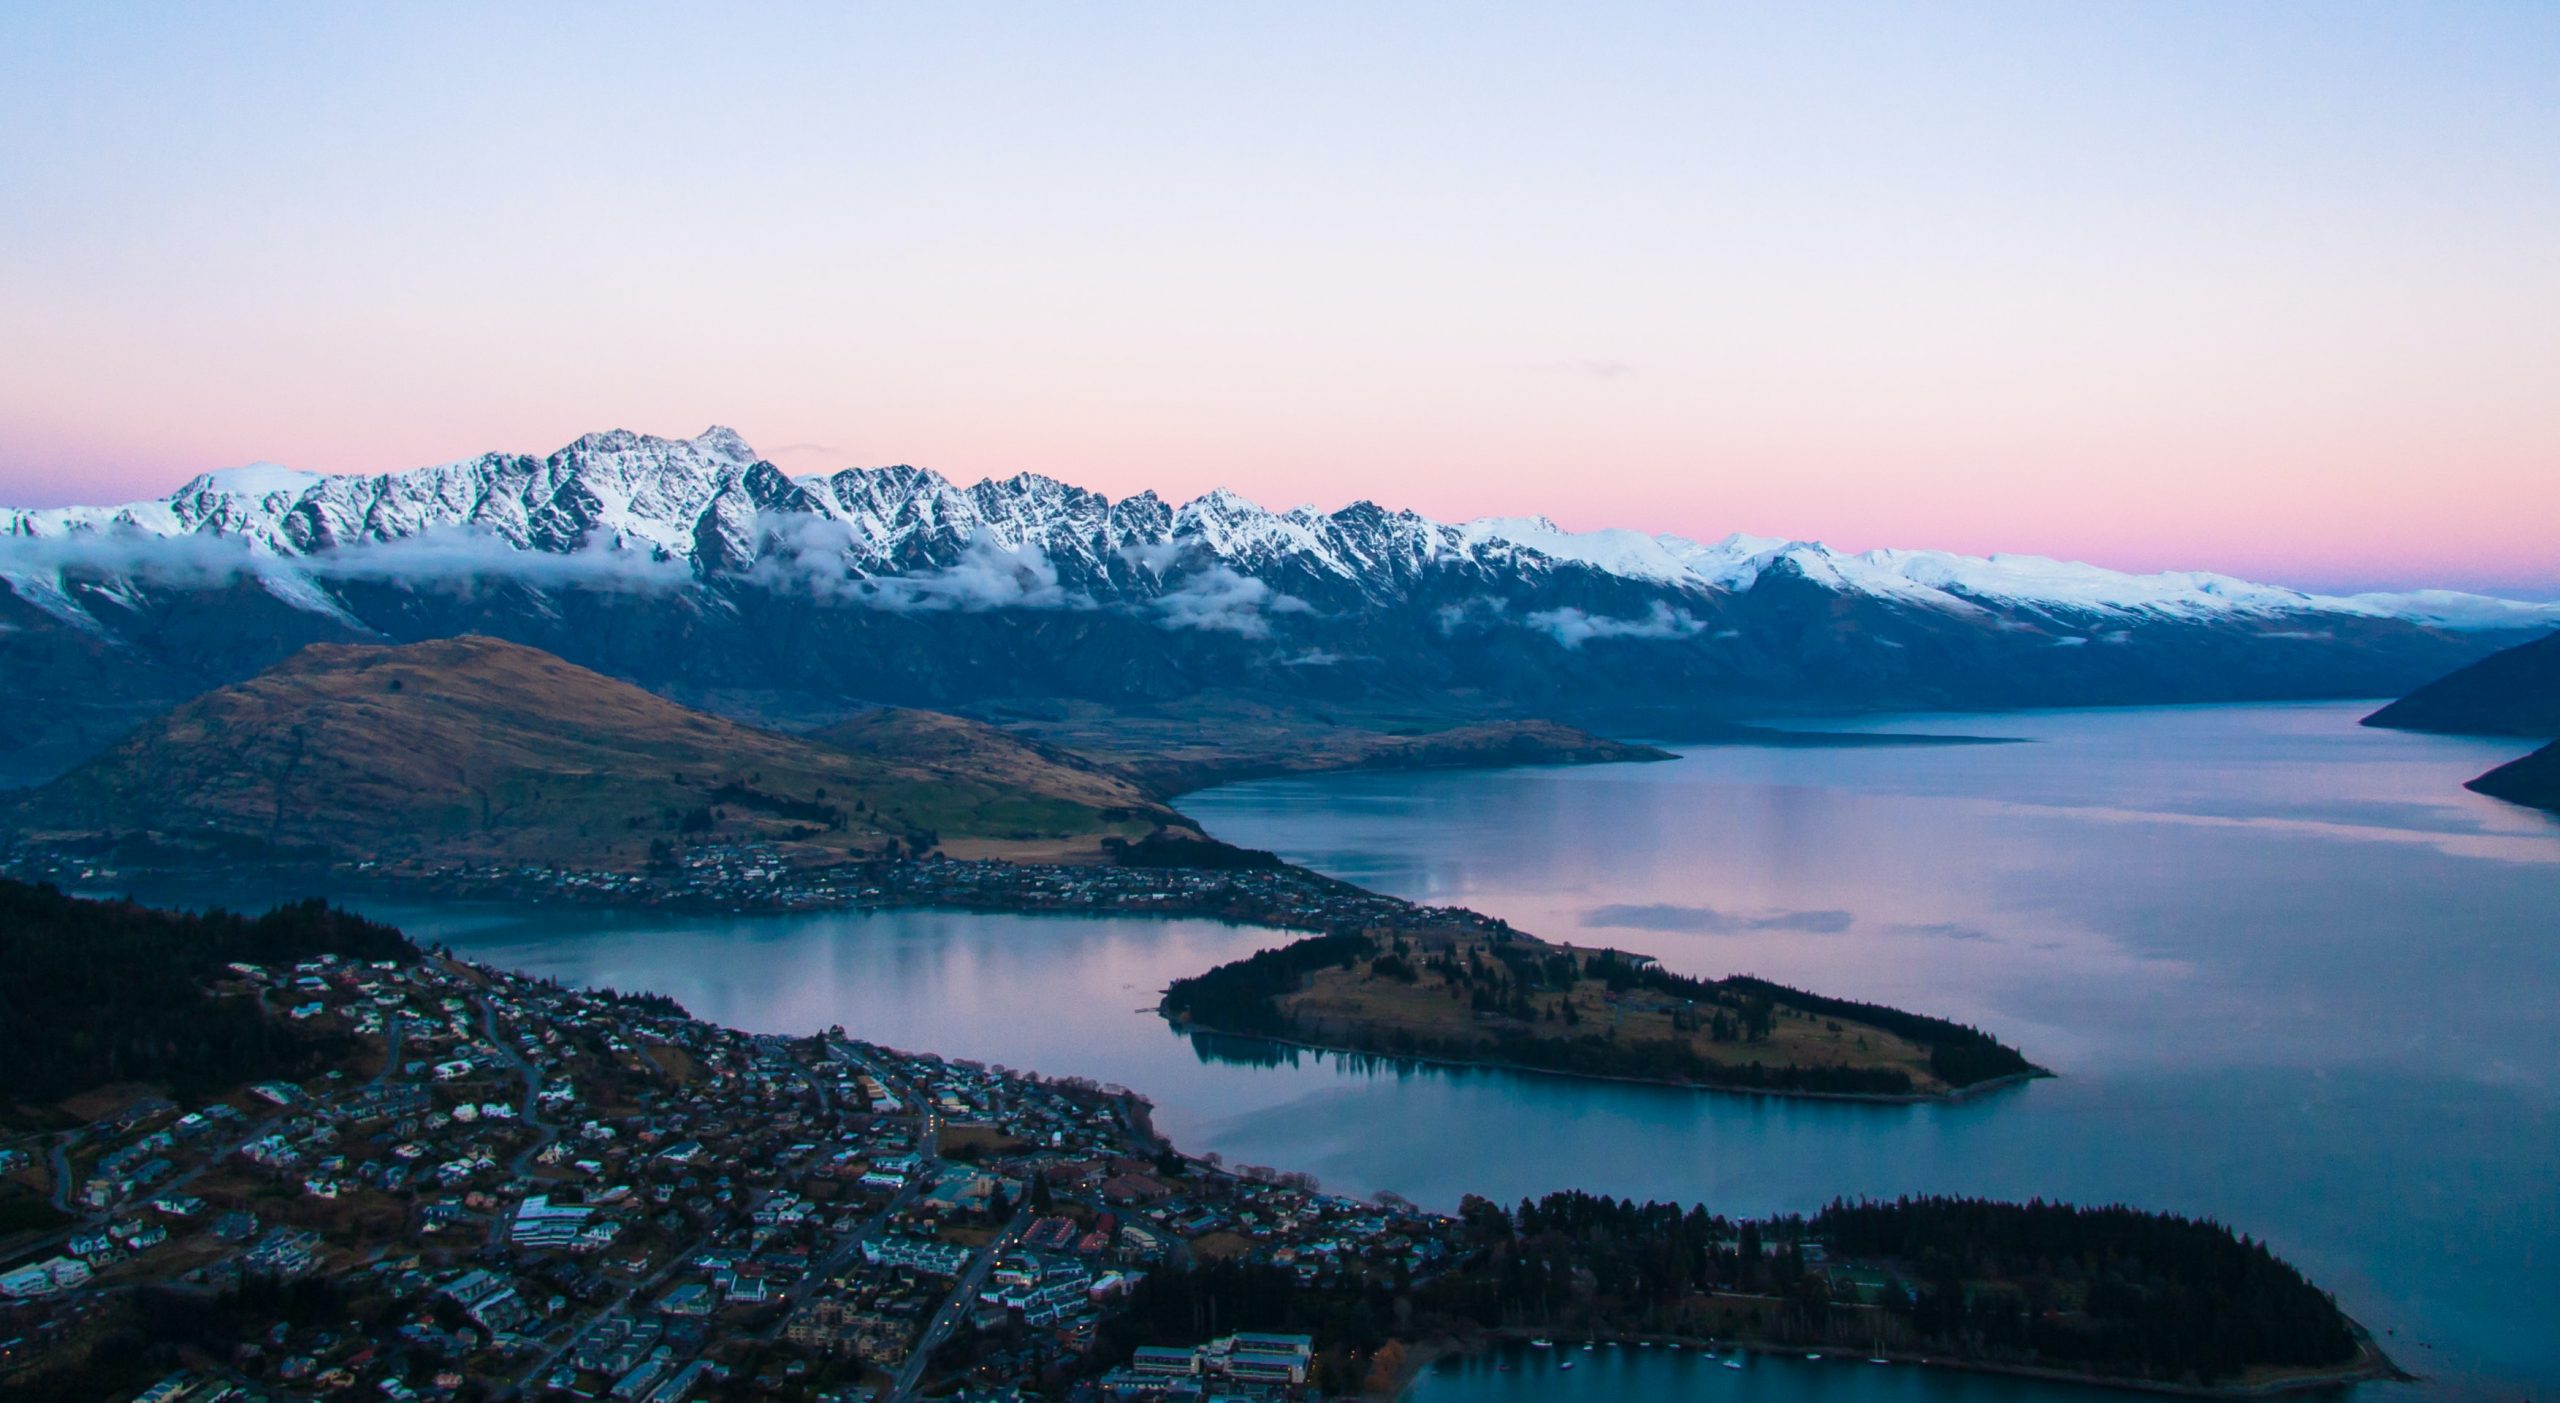 An aerial view of a lakeside town at sunrise overlooked by snow-capped mountains.